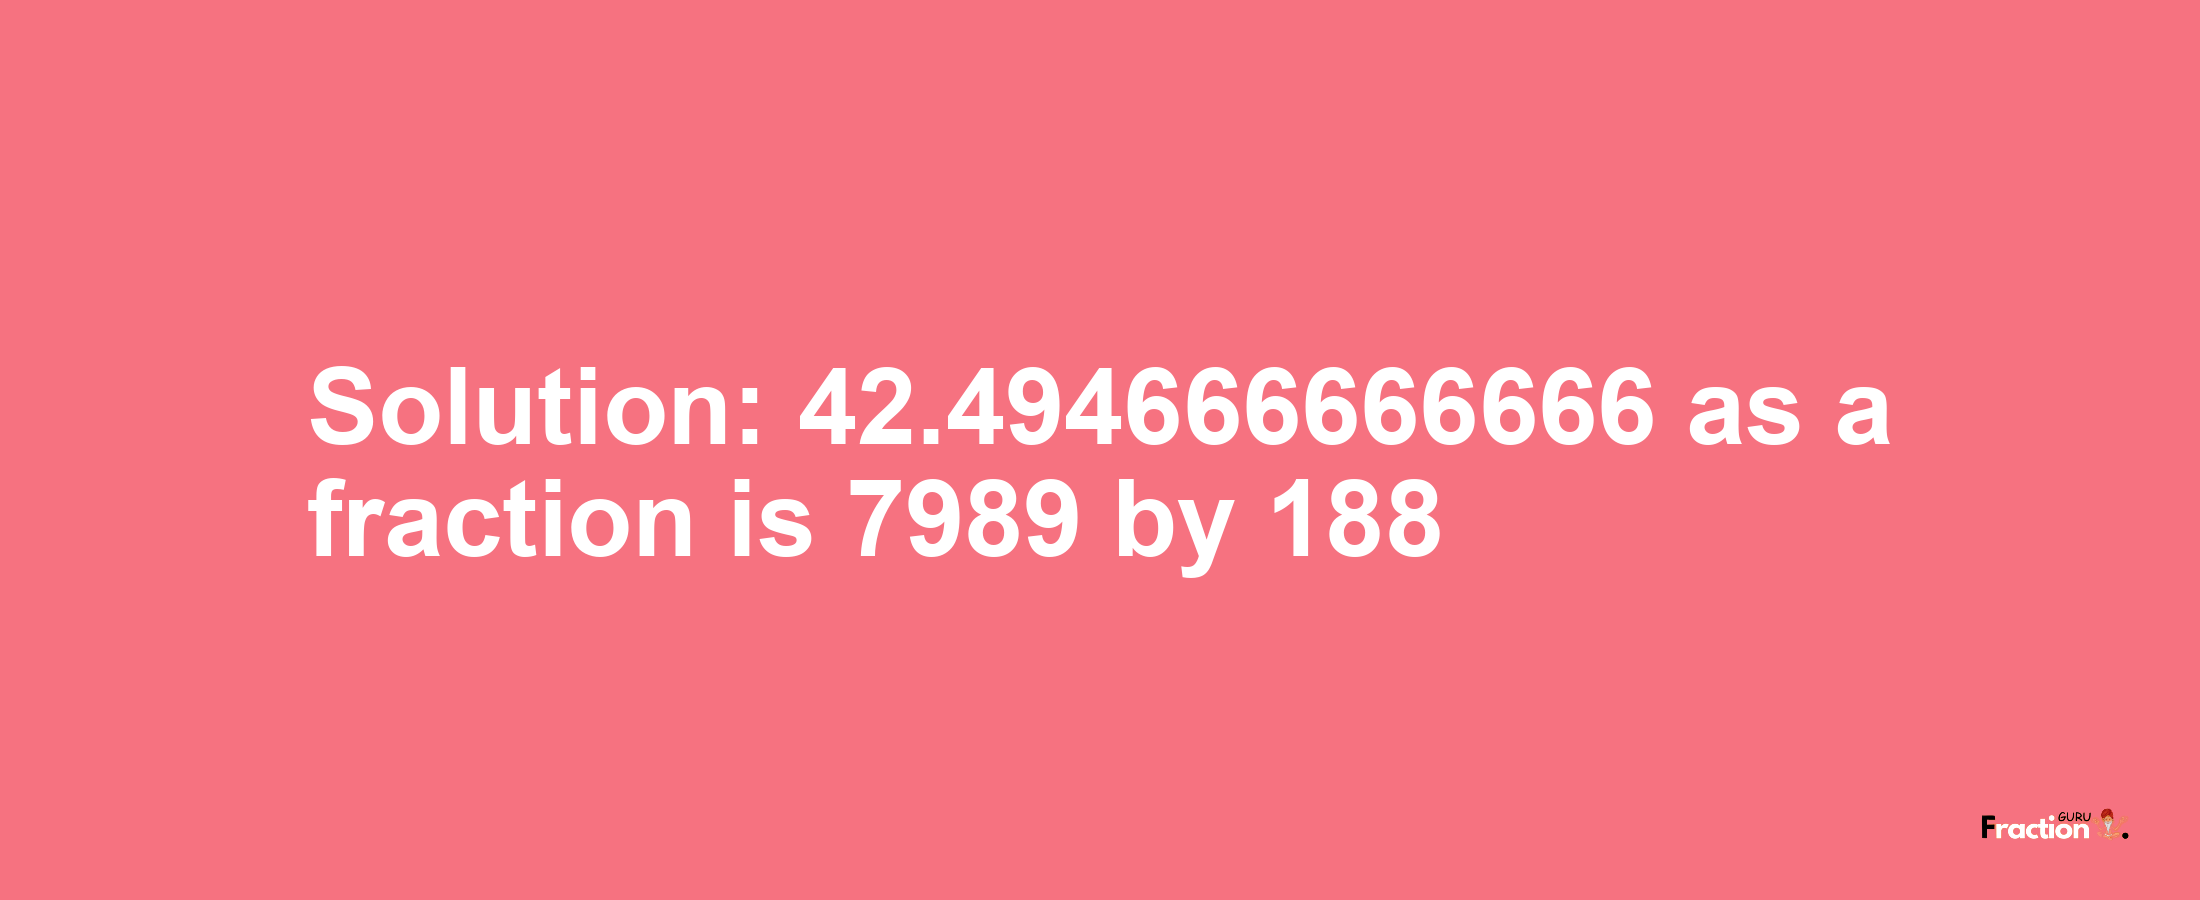 Solution:42.494666666666 as a fraction is 7989/188